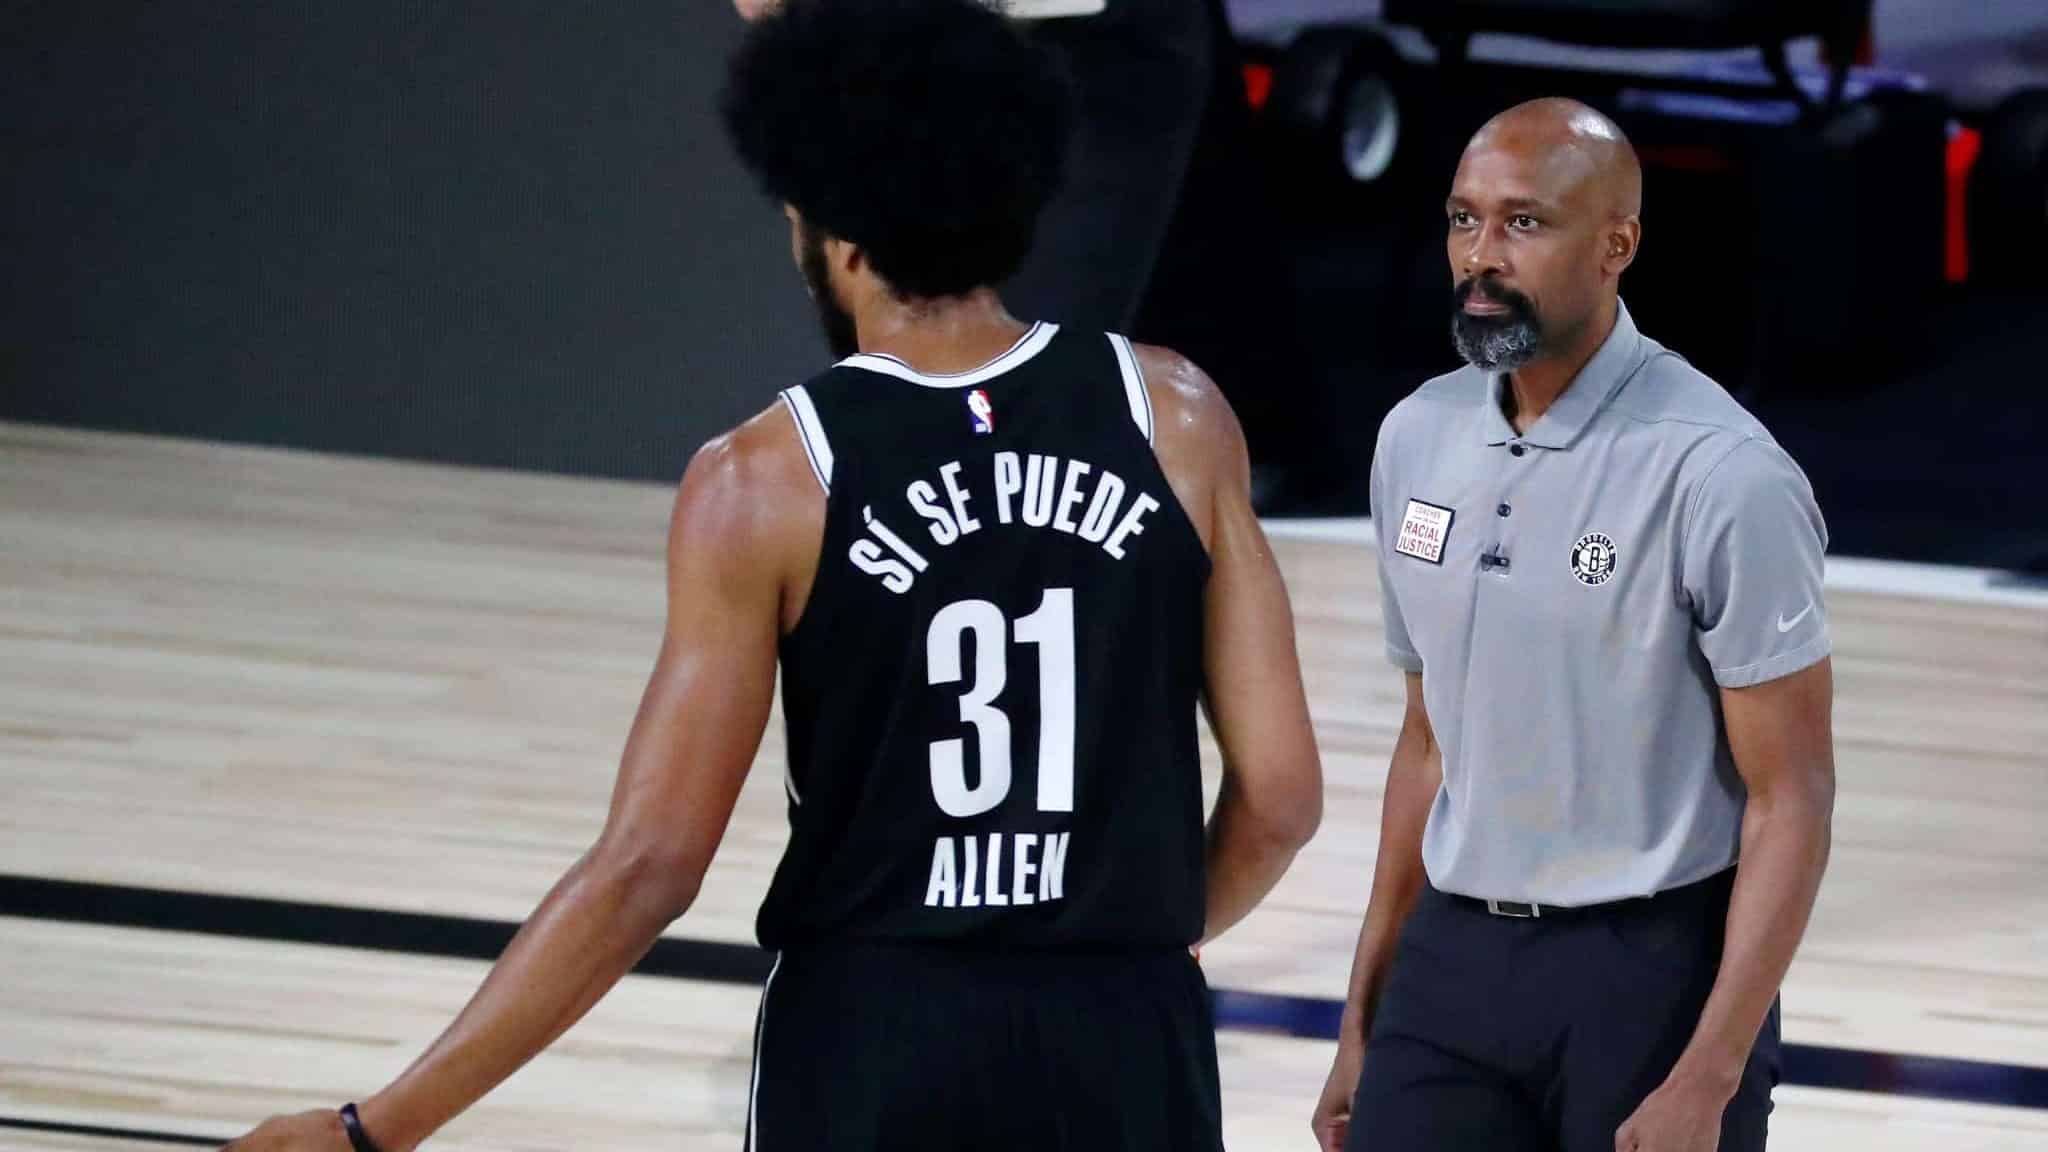 LAKE BUENA VISTA, FLORIDA - AUGUST 21: Head coach Jacque Vaughn of the Brooklyn Nets talks with Jarrett Allen #31 during a break in play against the Toronto Raptors during the second half in game three of the first round of the 2020 NBA Playoffs at The Field House at ESPN Wide World Of Sports Complex on August 21, 2020 in Lake Buena Vista, Florida. NOTE TO USER: User expressly acknowledges and agrees that, by downloading and or using this photograph, User is consenting to the terms and conditions of the Getty Images License Agreement. (